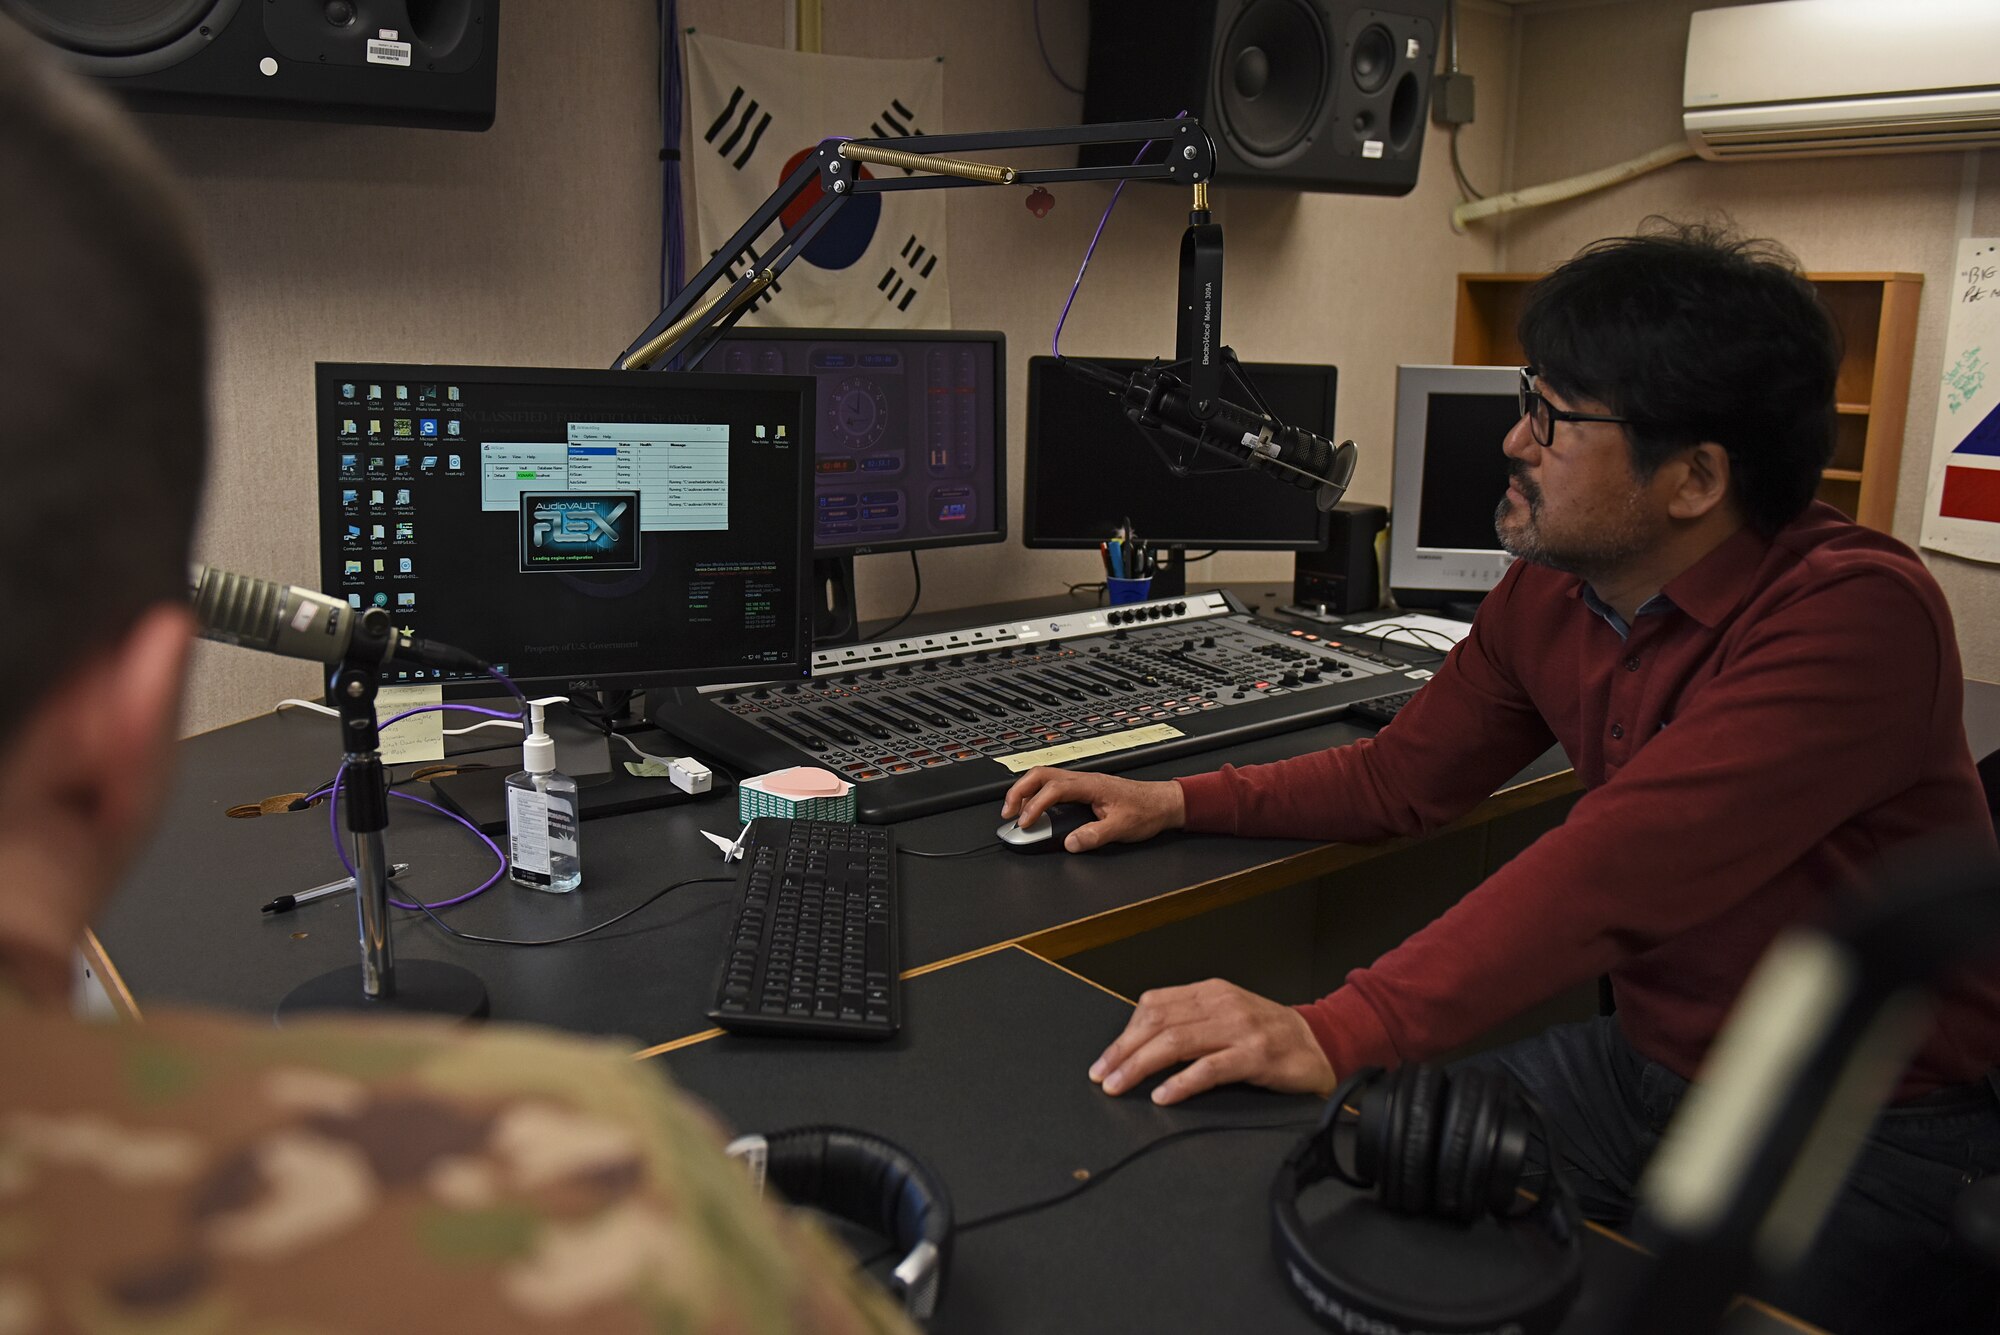 Yun Chol Chu, American Forces Network electrical technician, and U.S. Air Force Staff Sgt. Cameron Cook, AFN broadcast maintenance manager, troubleshoot an issue in AFN Kunsan’s studio at Kunsan Air Base, Republic of Korea, May 6, 2020. AFN Kunsan maintains a technical services section to ensure the equipment used to produce and broadcast functions properly. (U.S. Air Force photo by Staff Sgt. Mackenzie Mendez)